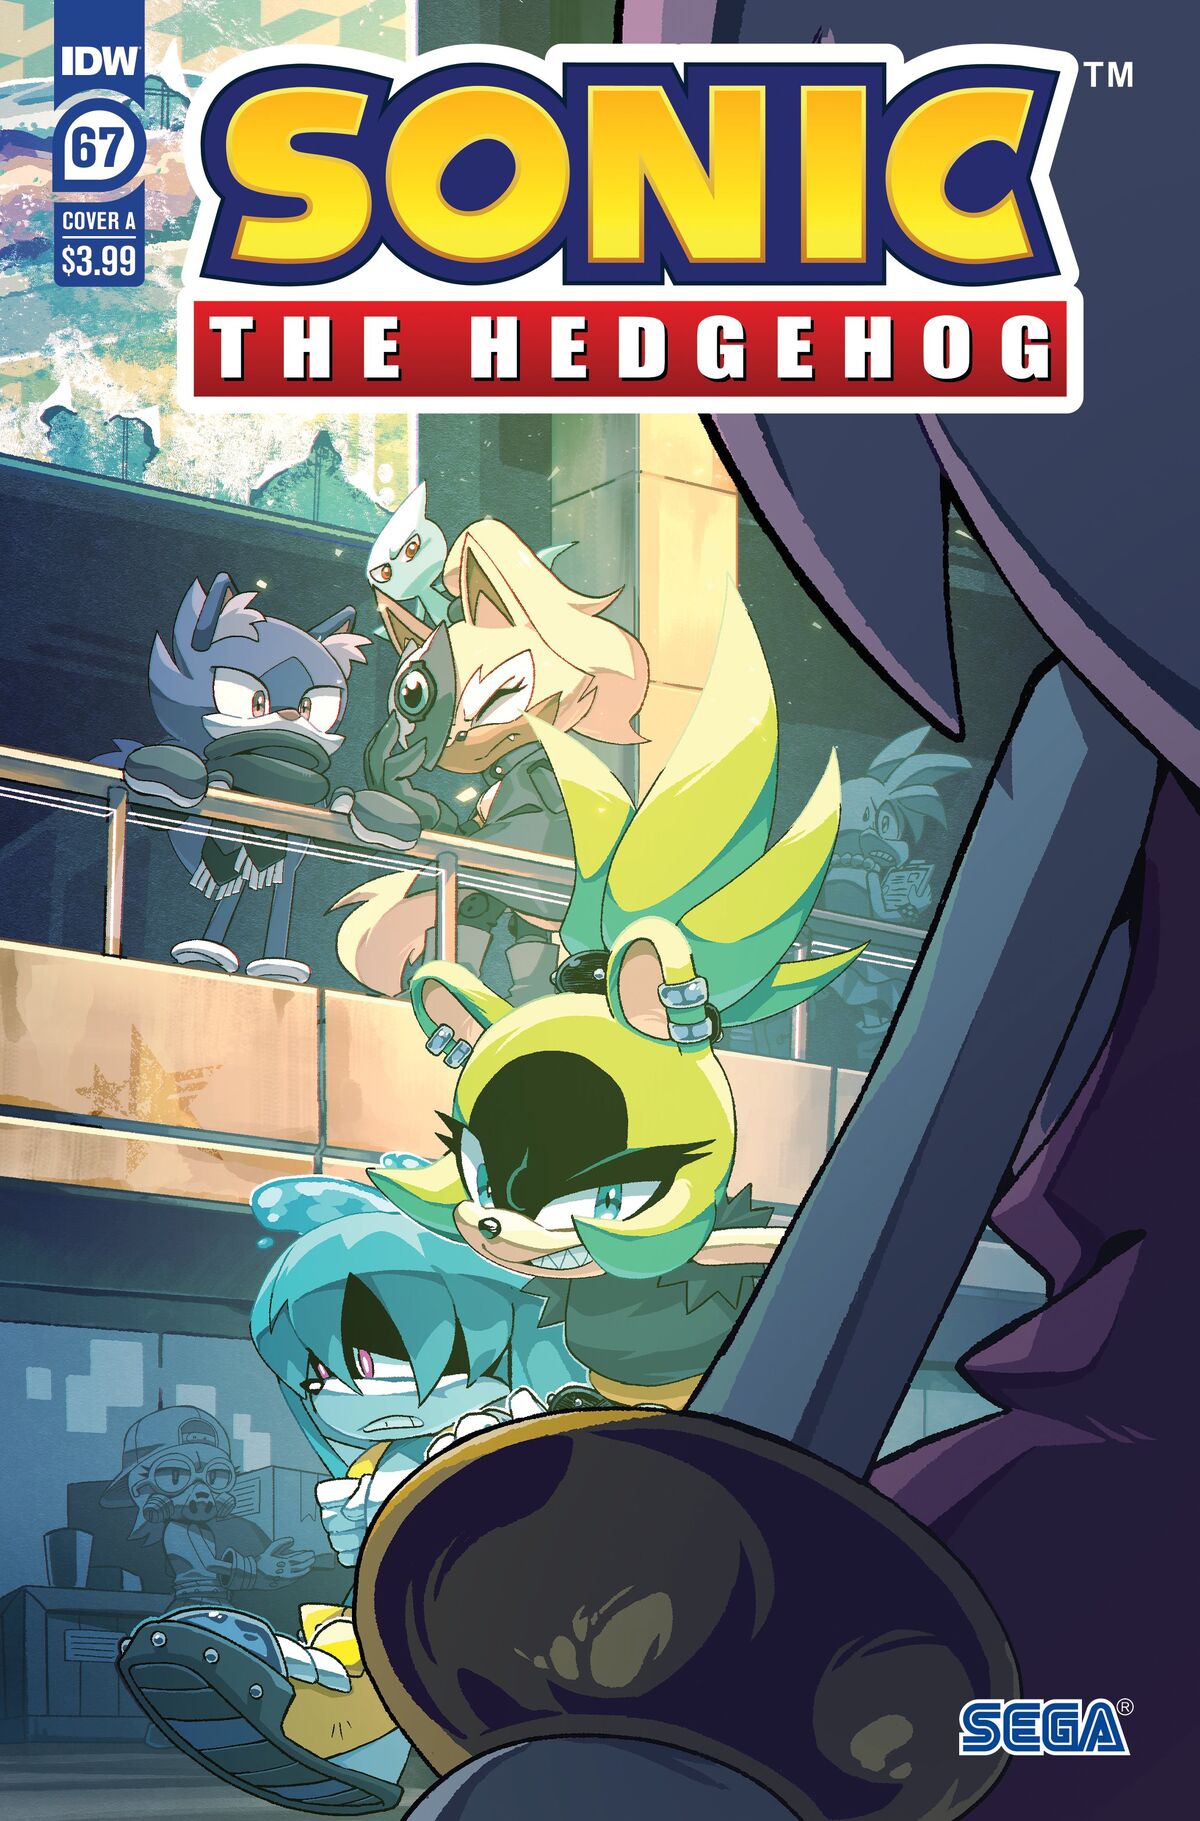 Sonic X Issue 13  Read Sonic X Issue 13 comic online in high